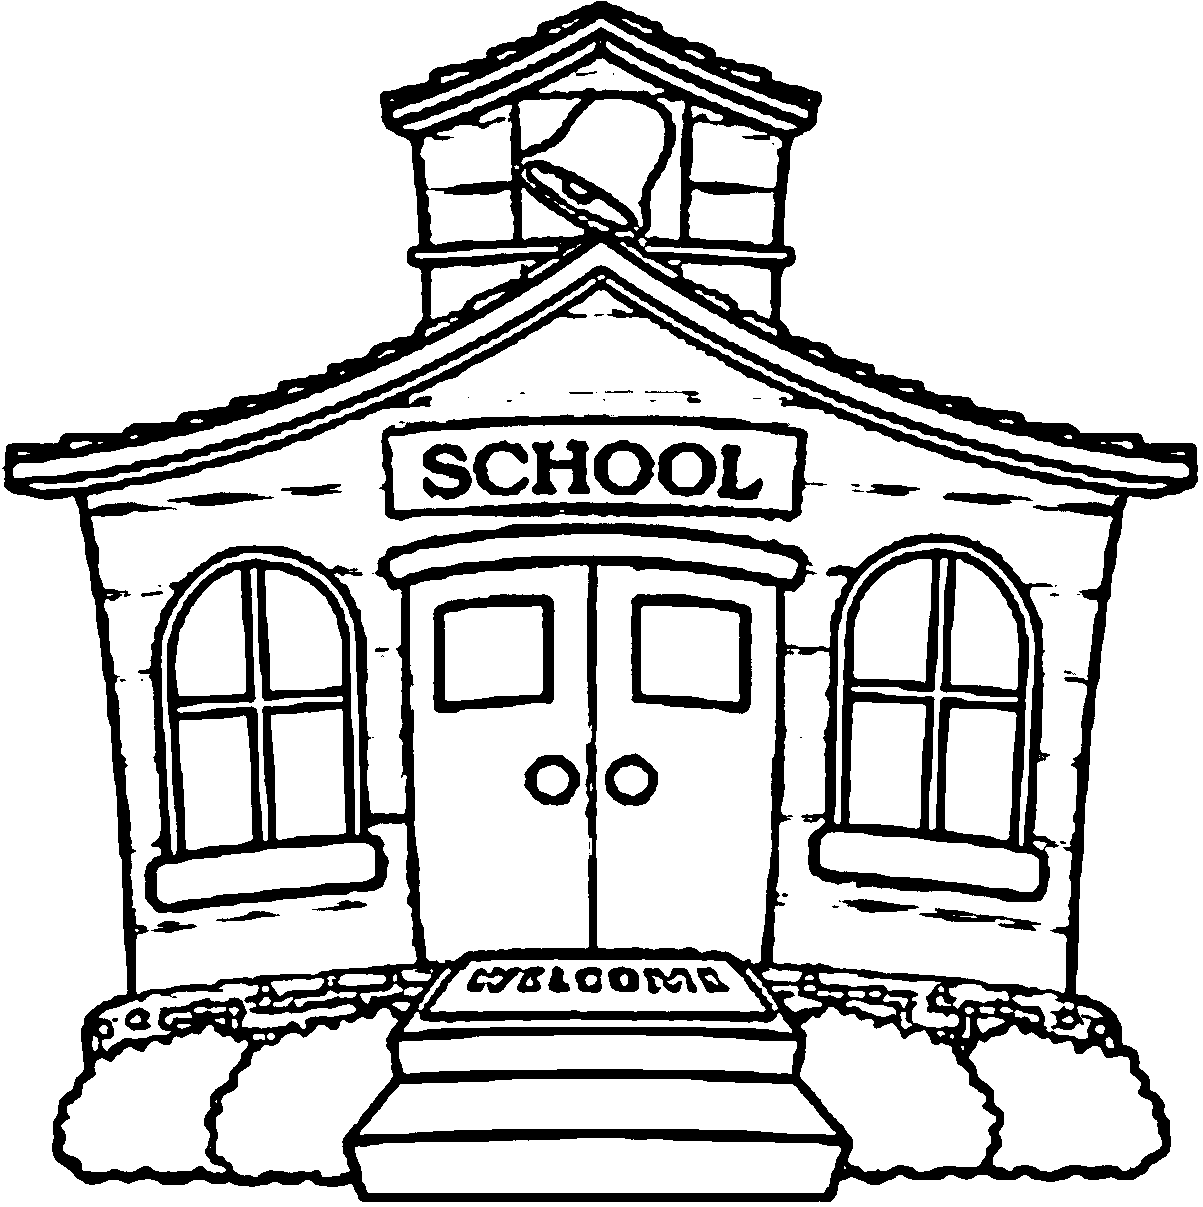 All 102+ Images school building clip art black and white Excellent